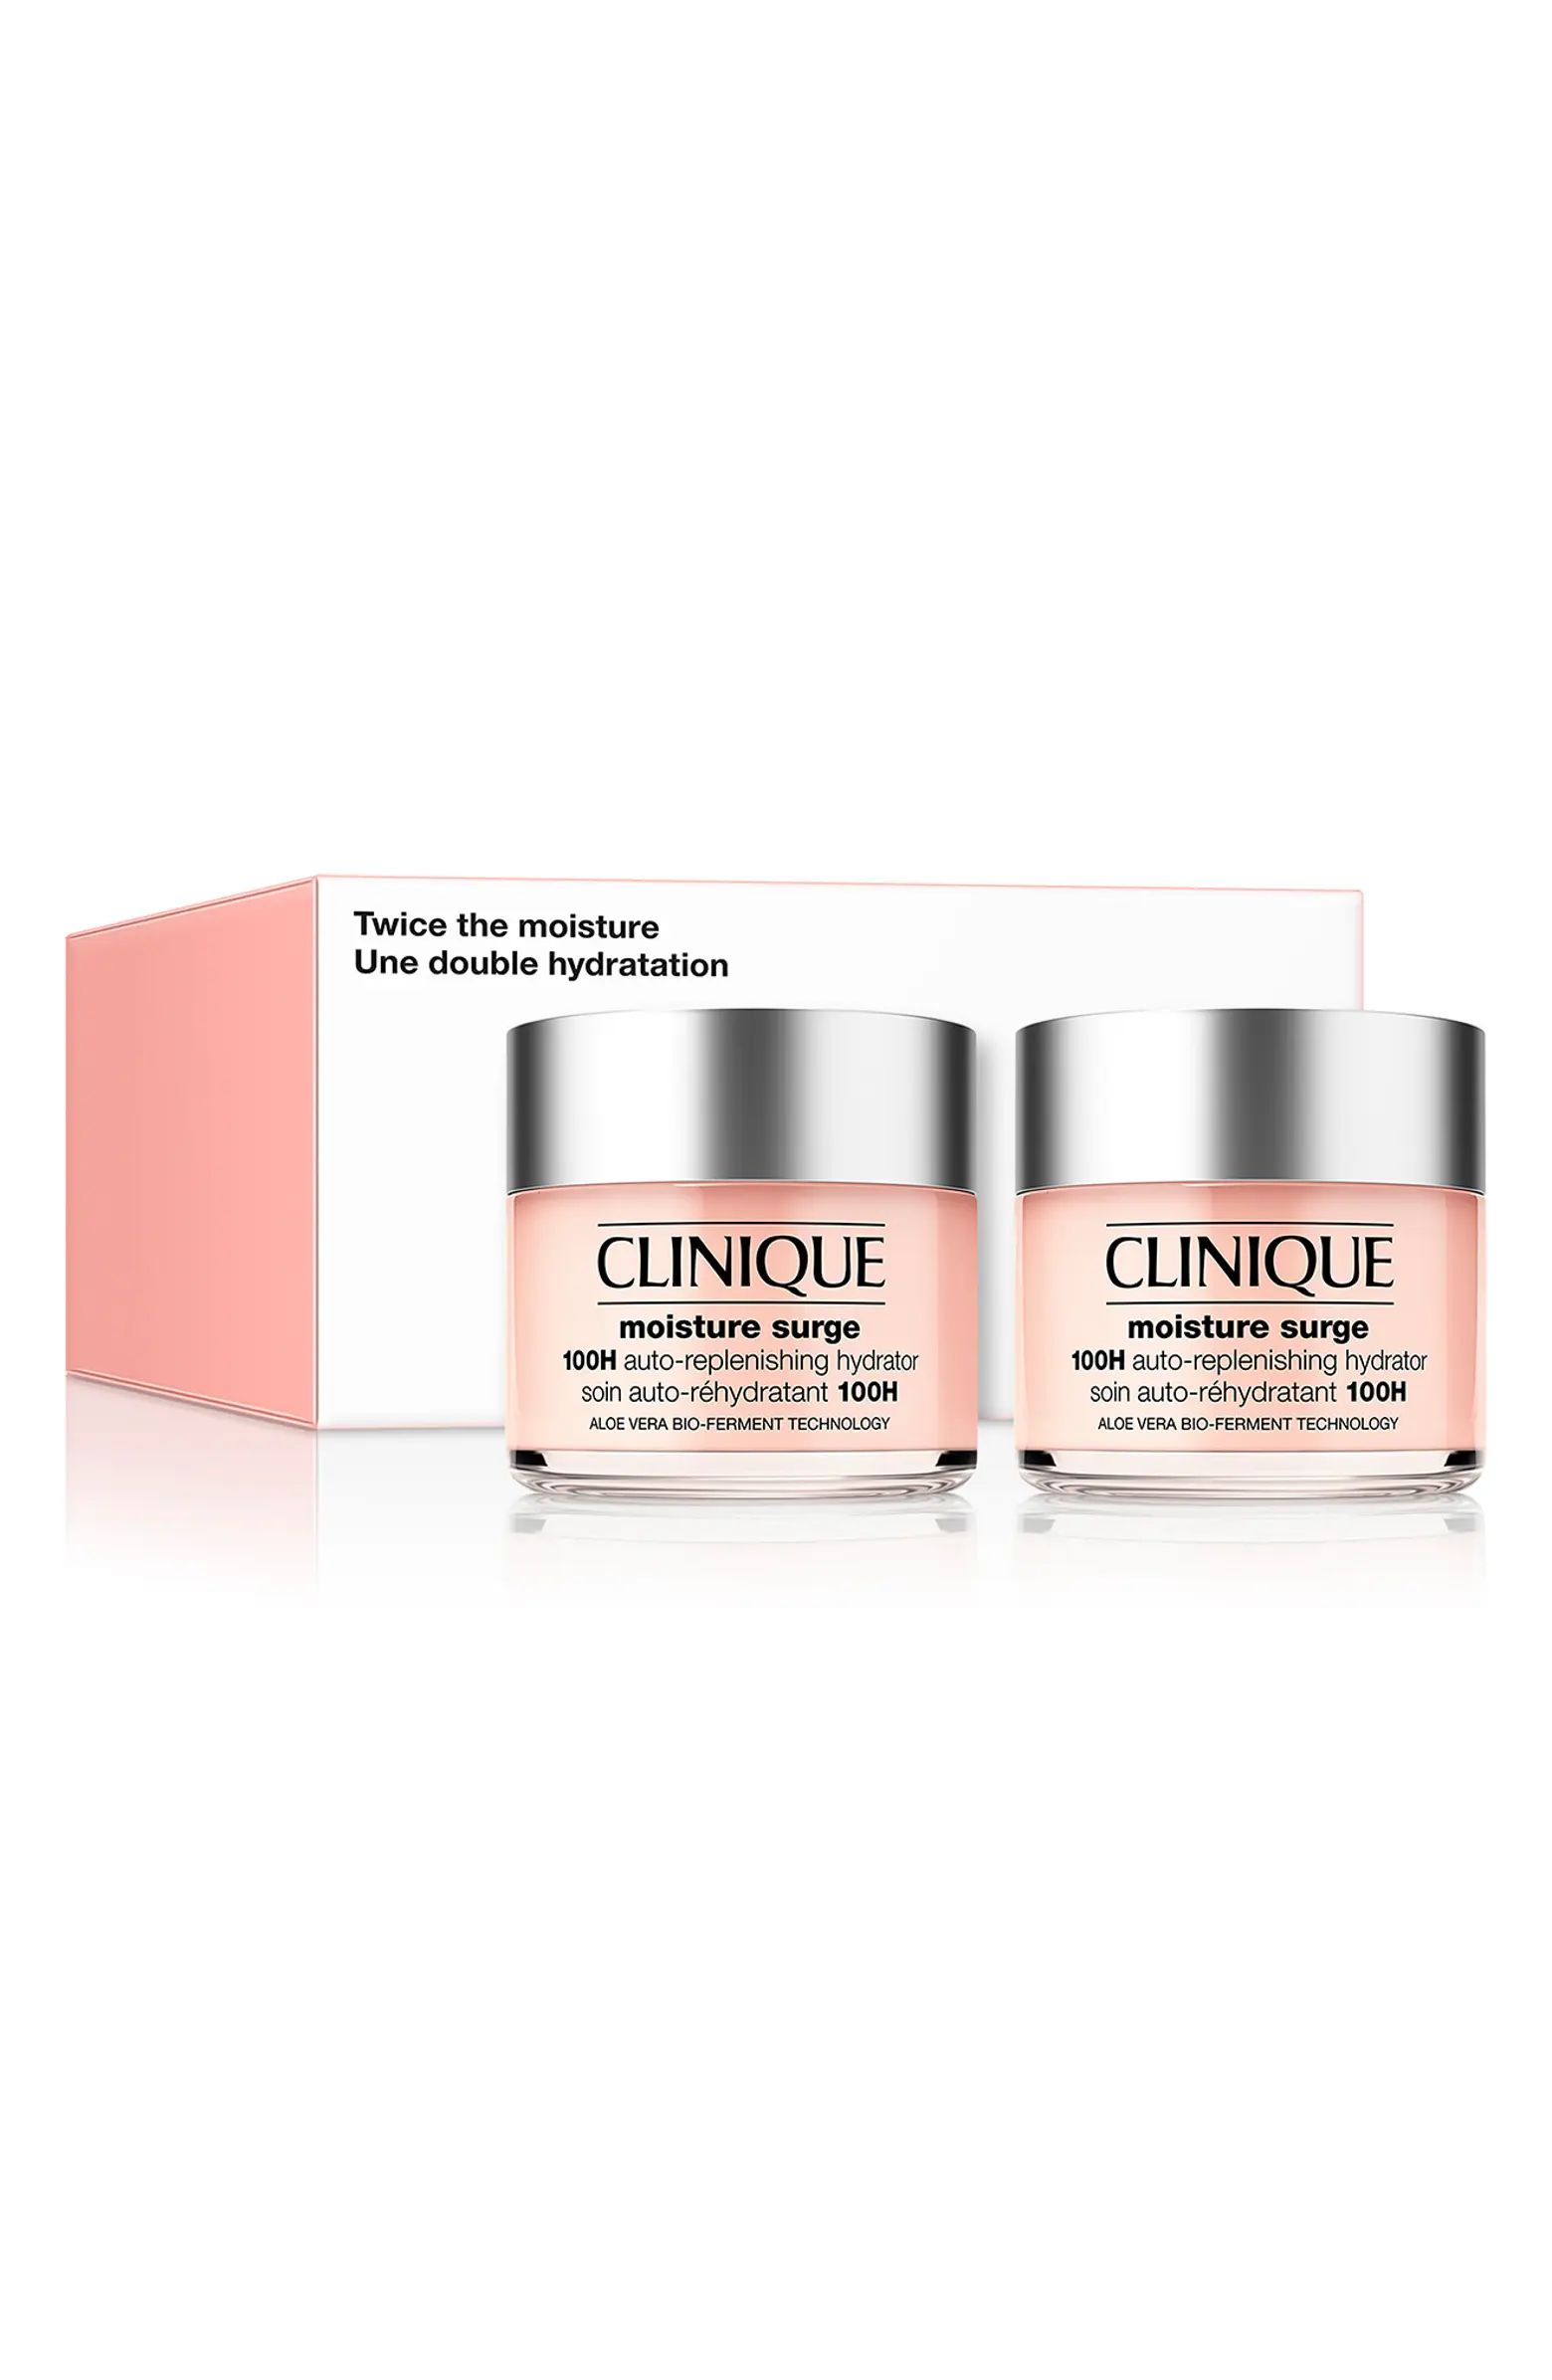 Twice the Moisture Duo Set $164 Value | Nordstrom